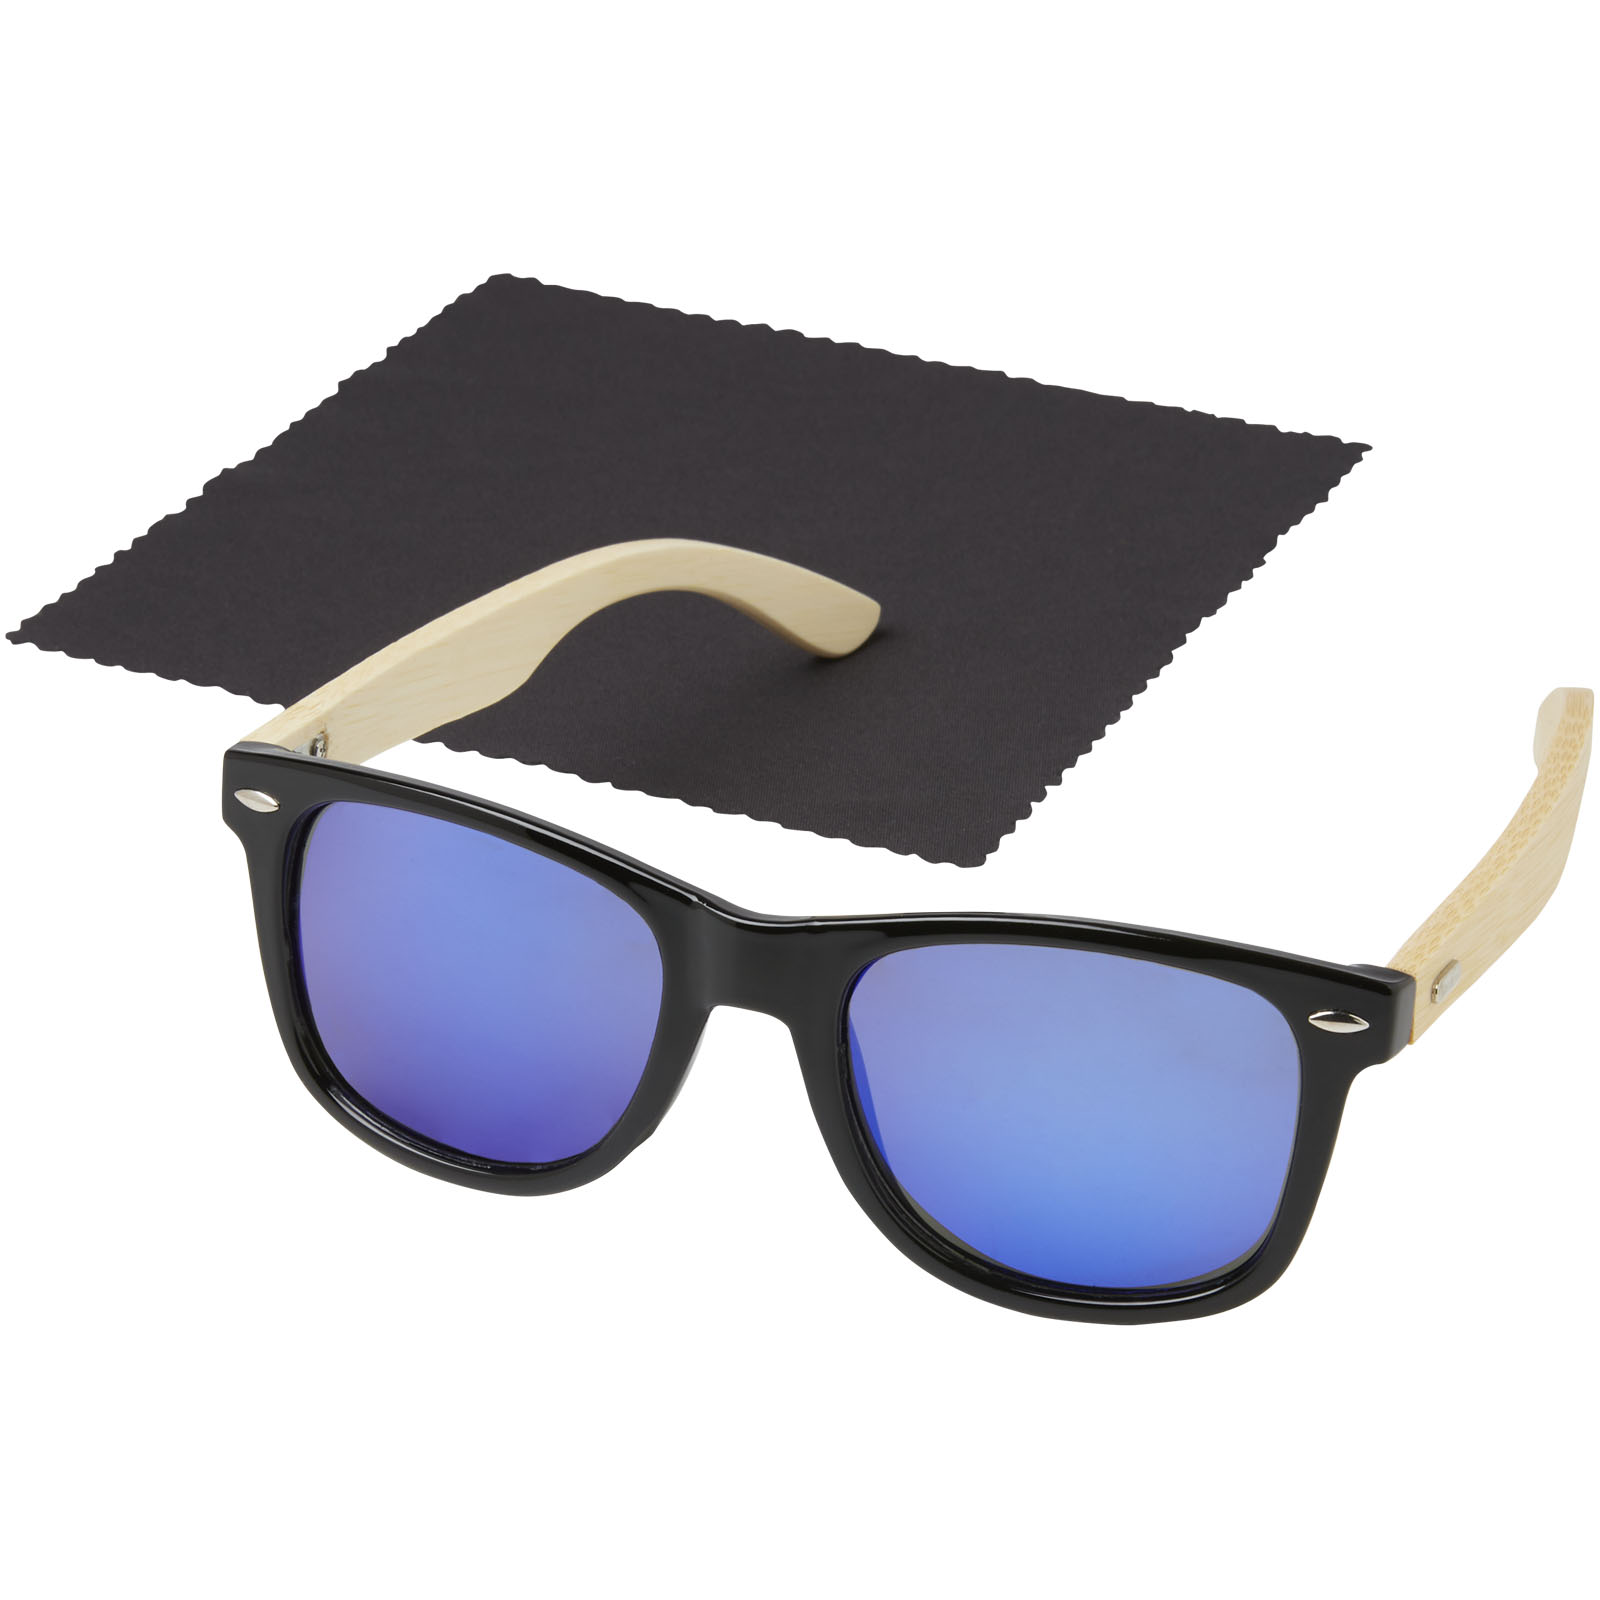 Advertising Sunglasses - Taiyō rPET/bamboo mirrored polarized sunglasses in gift box - 3